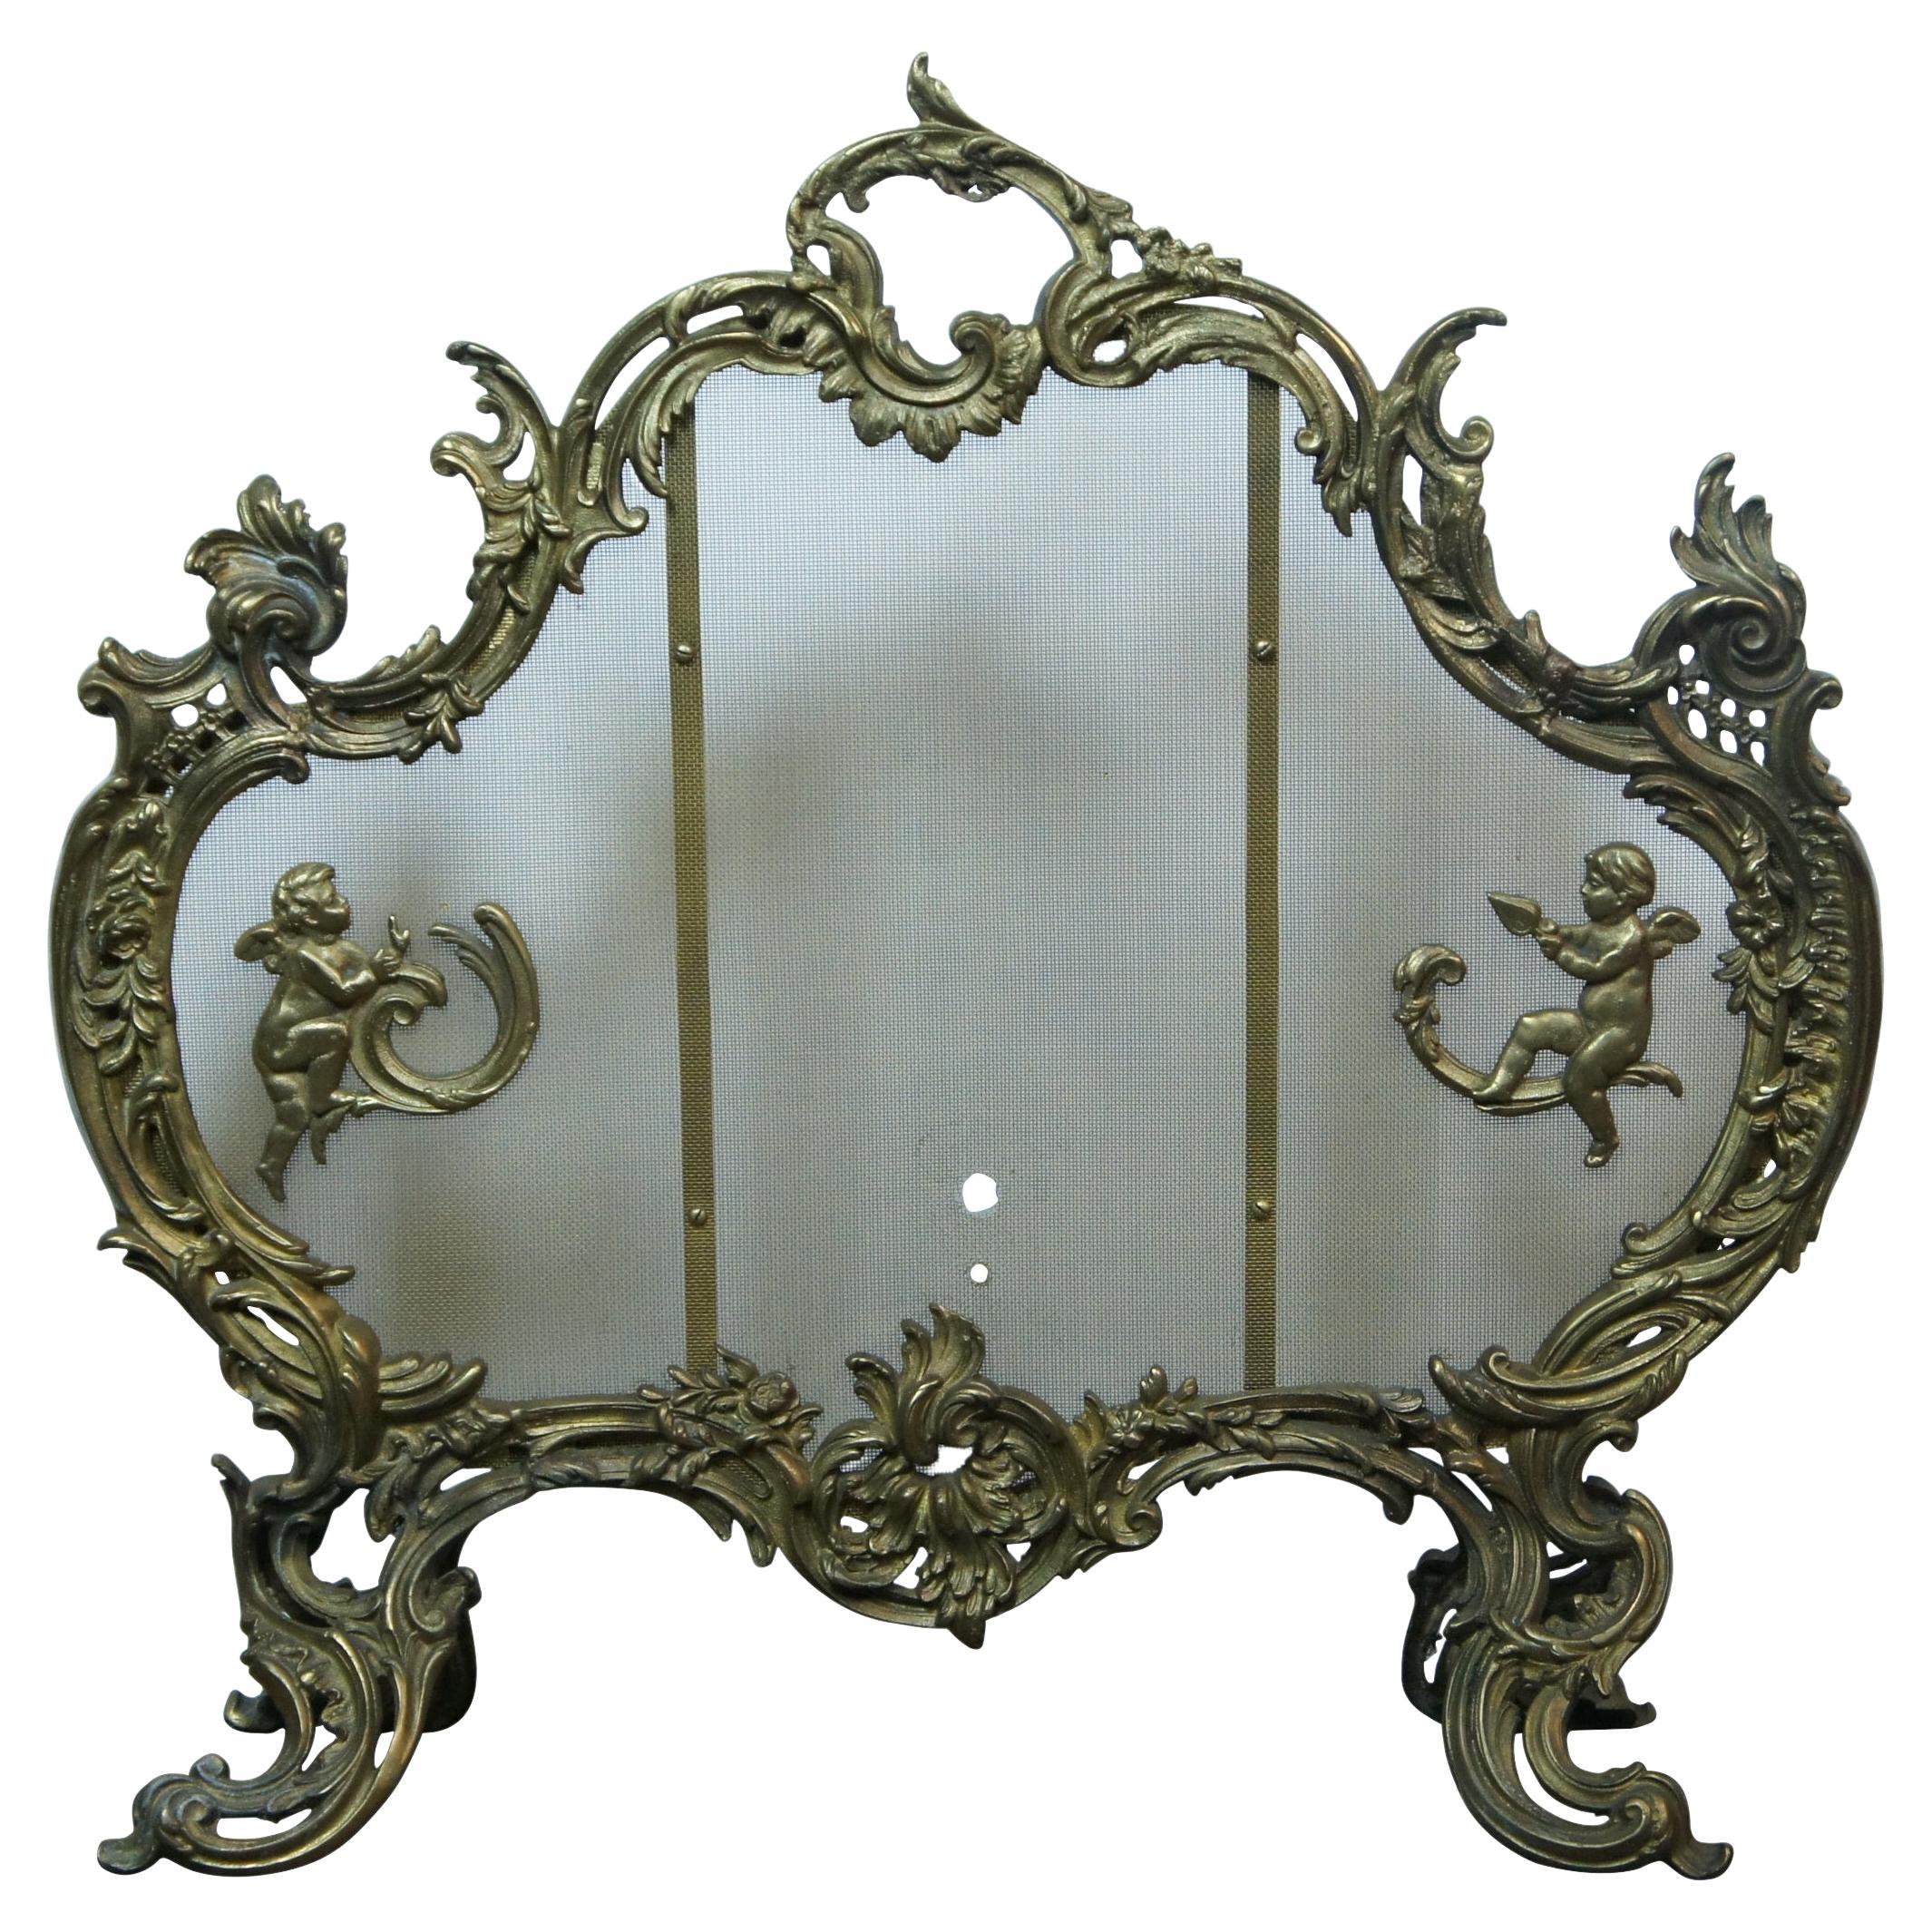 19th Century French rococo or baroque style bronze fire screen accented with cherubs and fender corners.

Screen - 28.25” x 8” x 28” / Fender Corners - 9” x 3.5” x 16” (Width x Depth x Height).